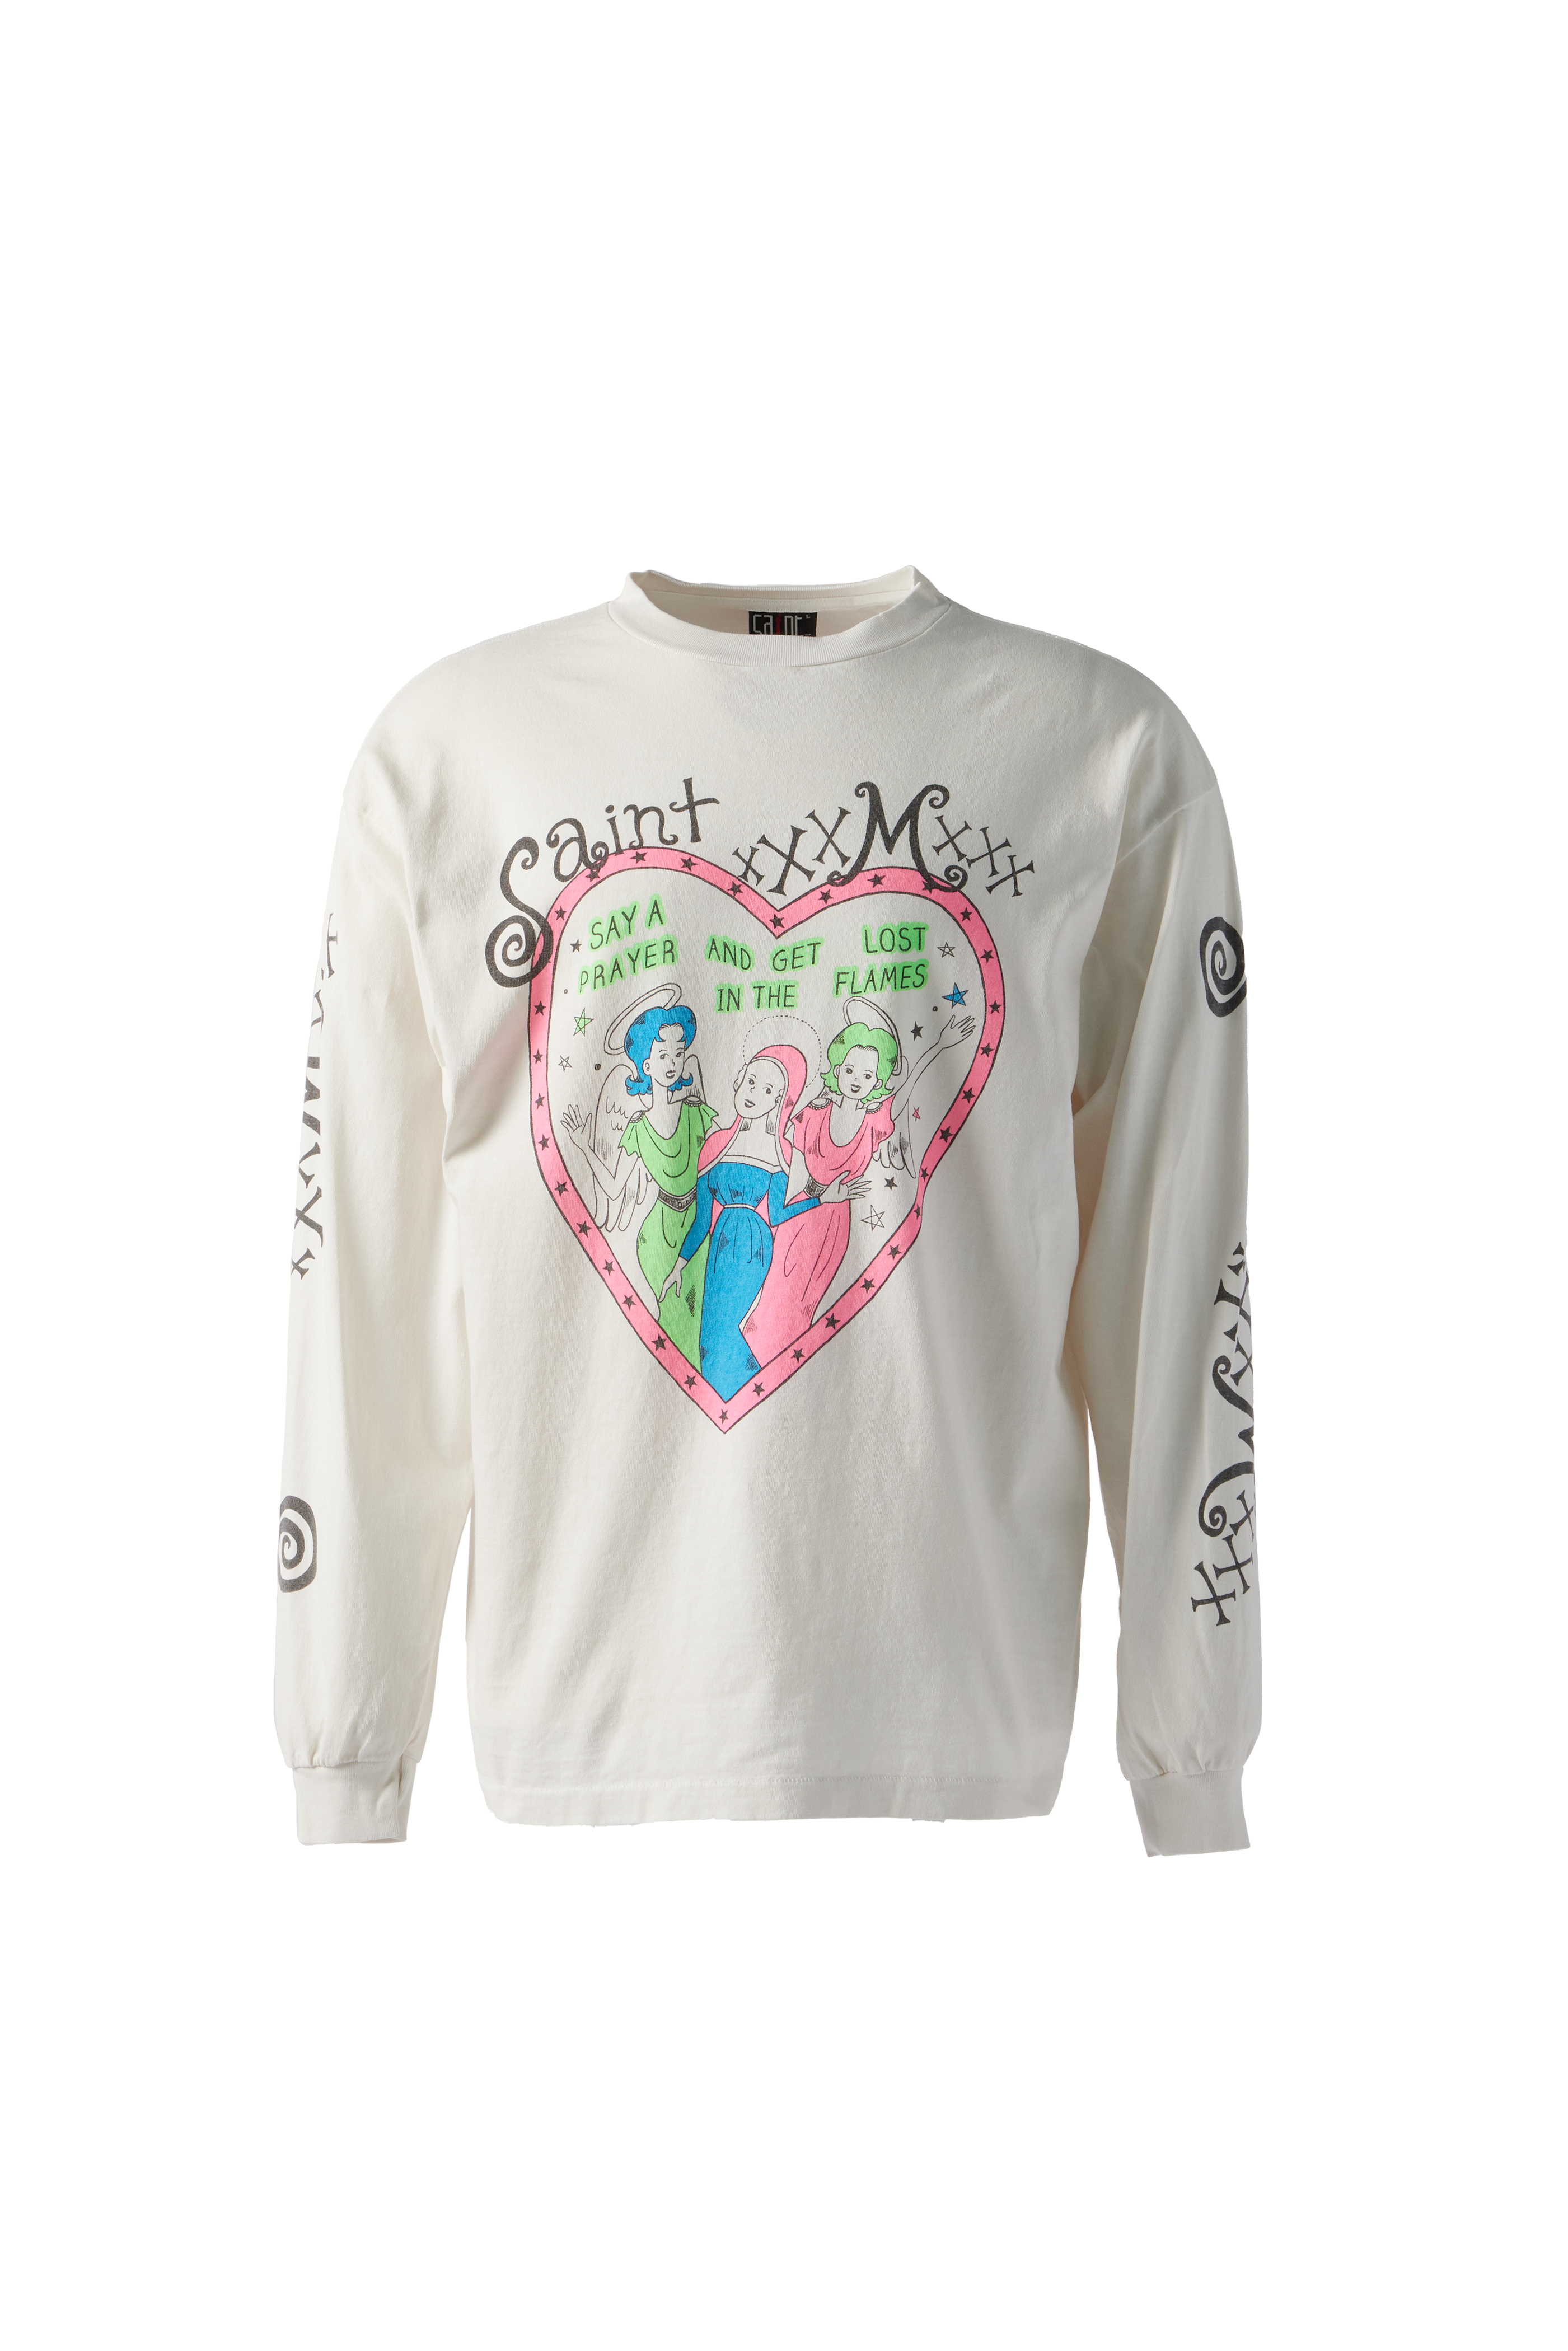 SAINT MXXXXXX - Pink Heart L/S Tee product image